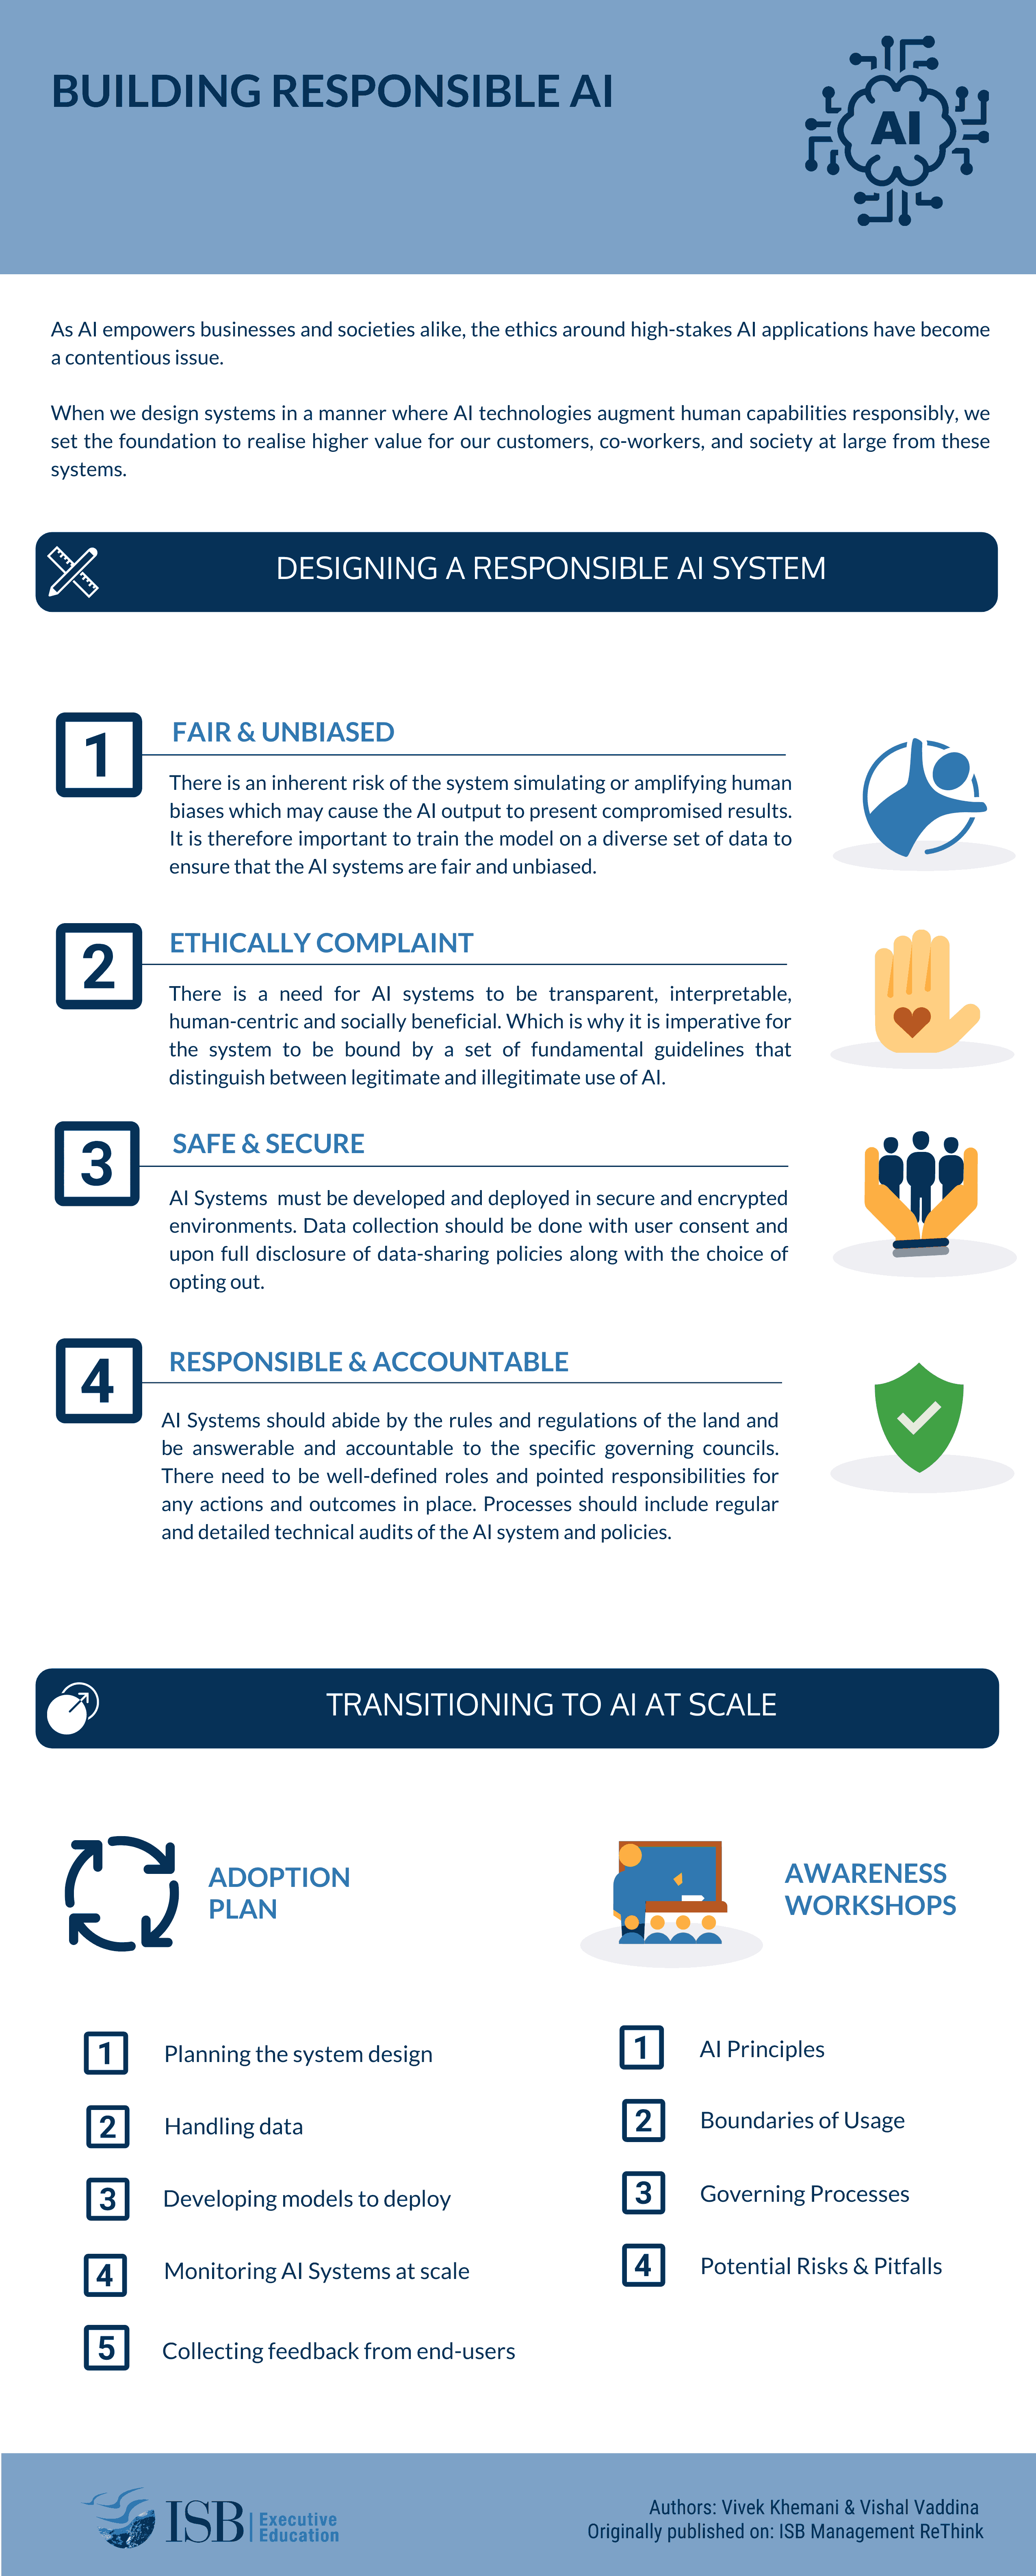 Infographic - Building Responsible AI